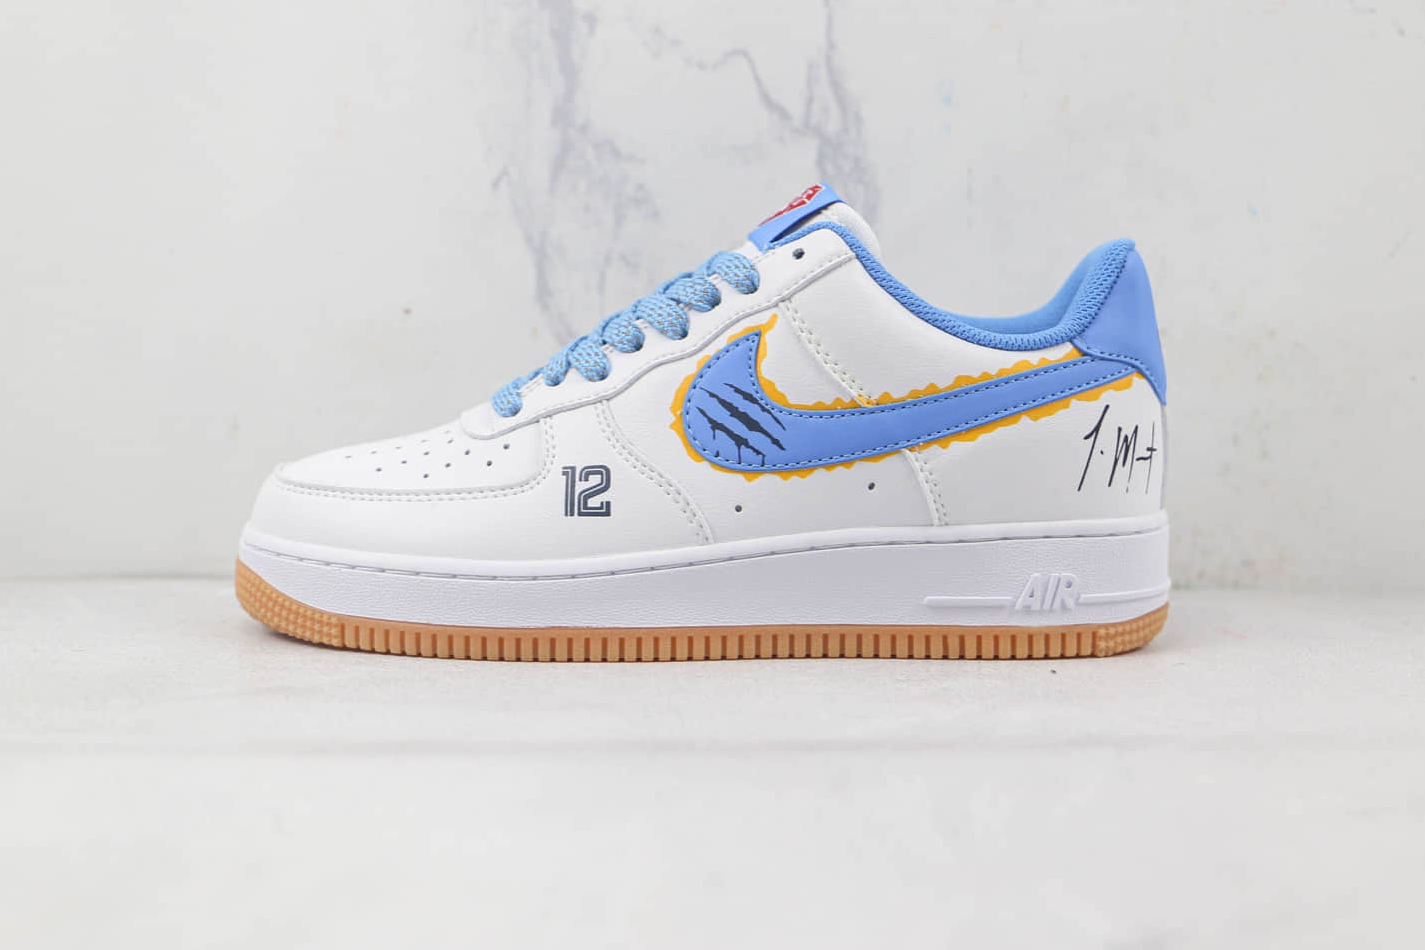 Nike Air Force 1 07 Low White Blue Yellow NH1412-992 - Stylish and Versatile Sneakers